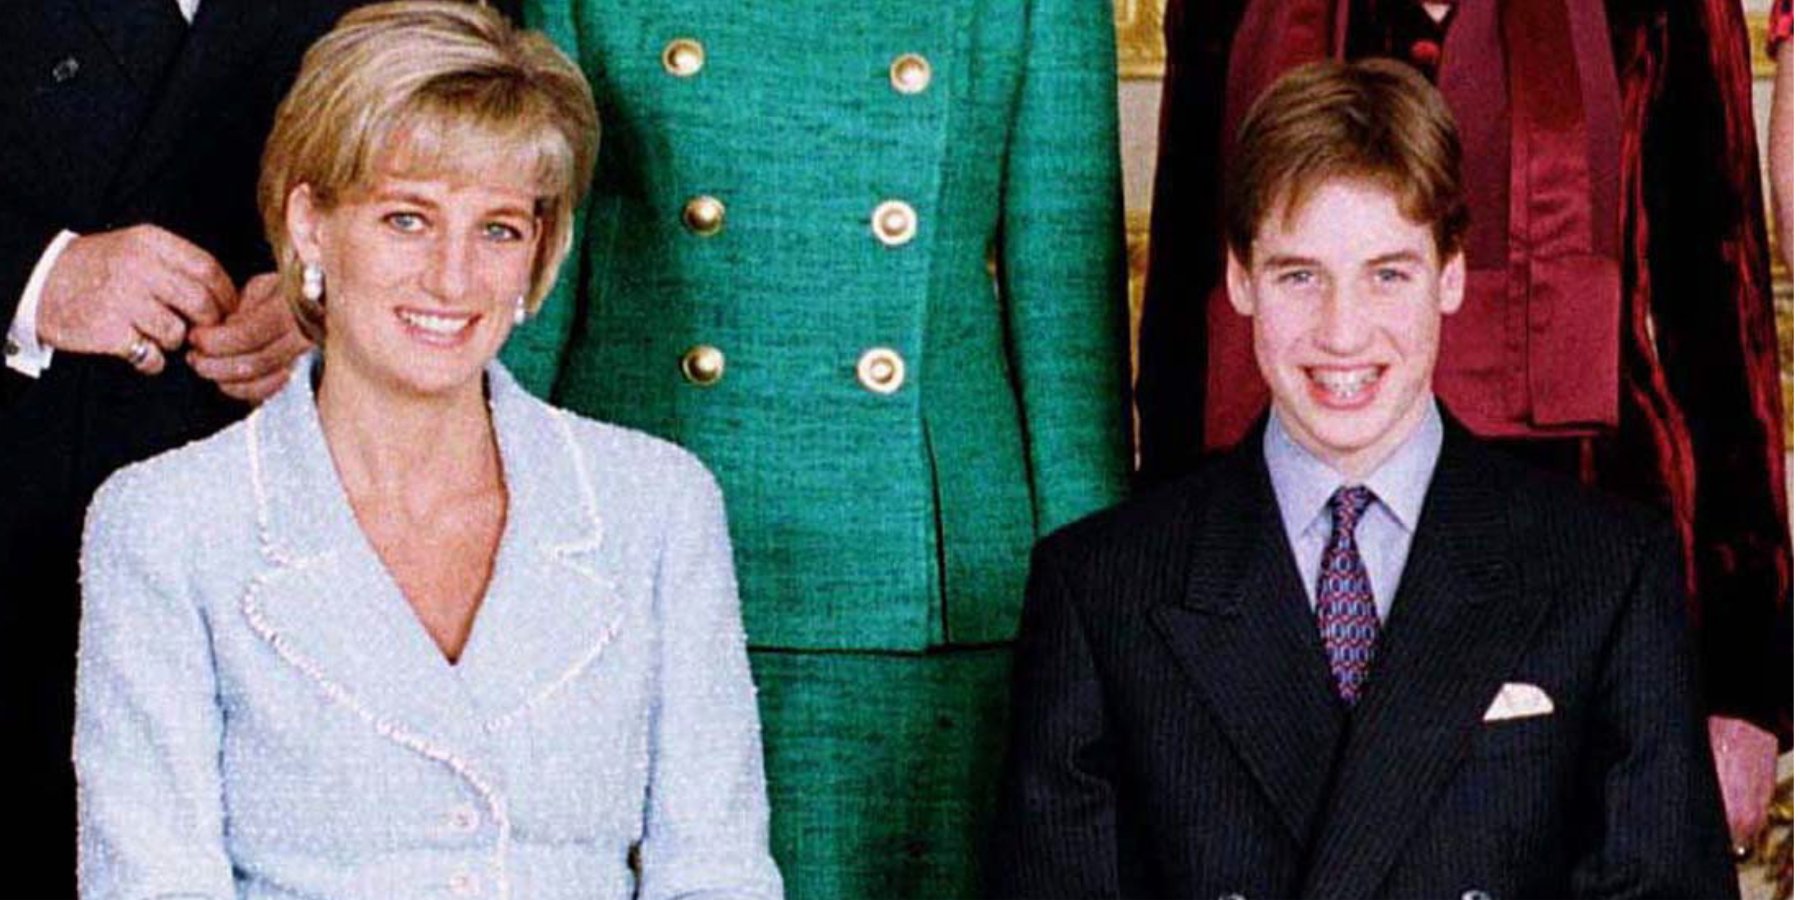 Princess Diana and Prince William at his confirmation.